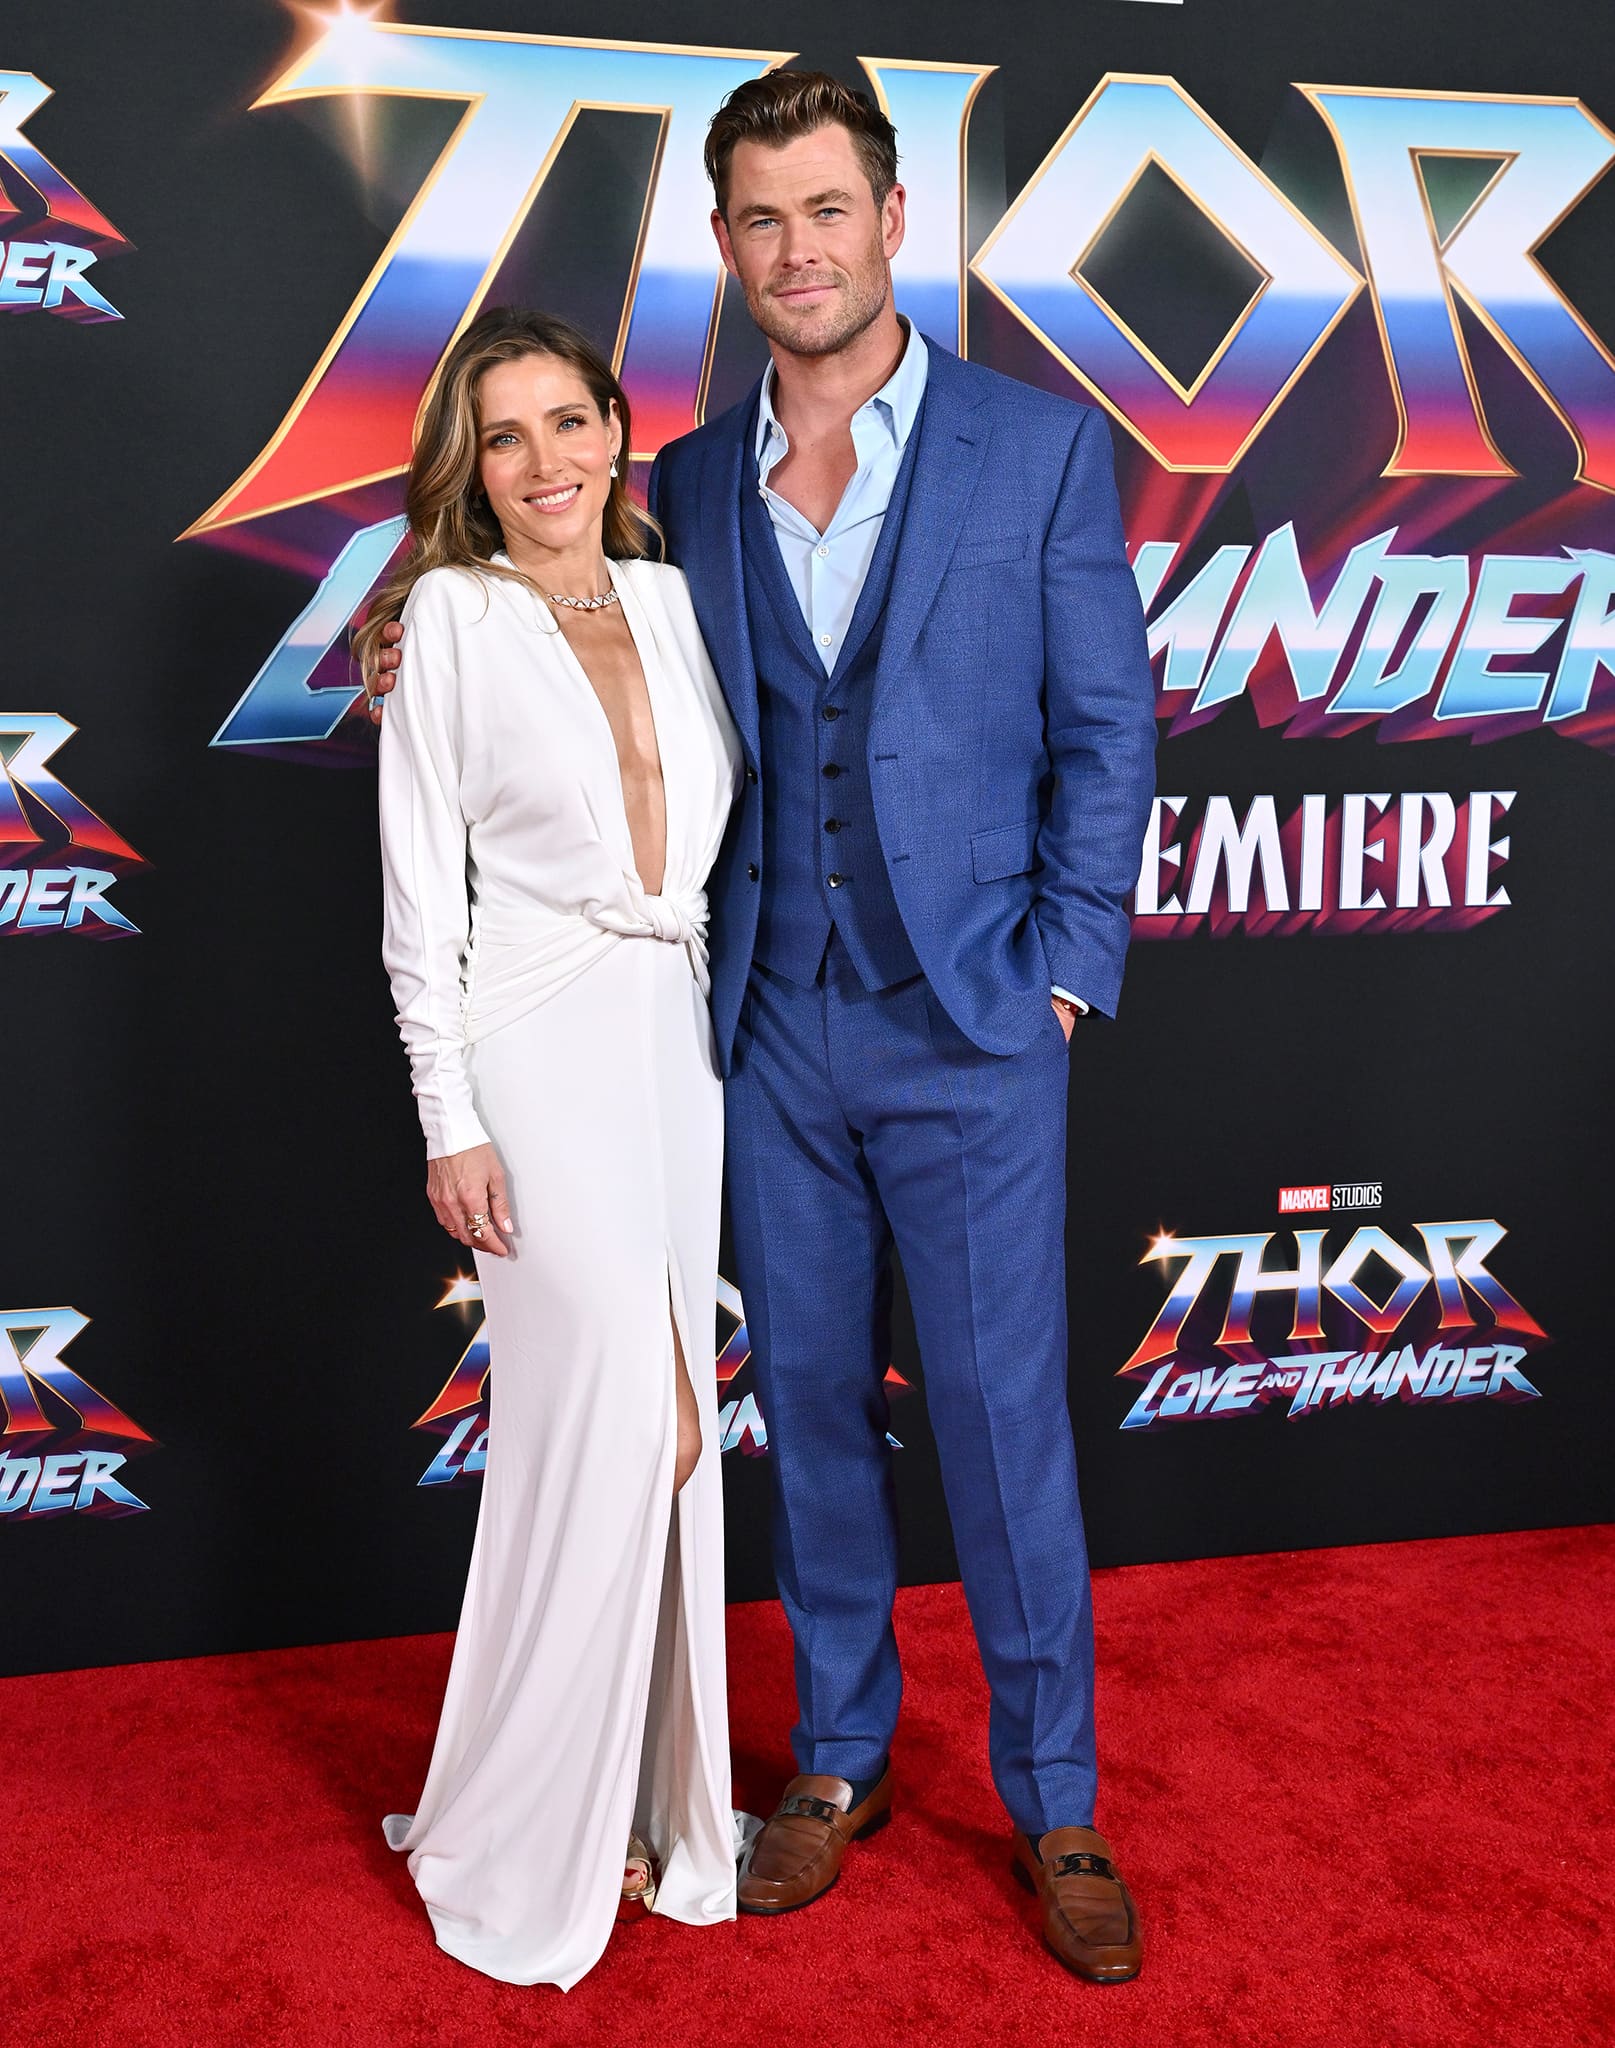 Elsa Pataky and Chris Hemsworth pose together at the premiere of Thor: Love and Thunder